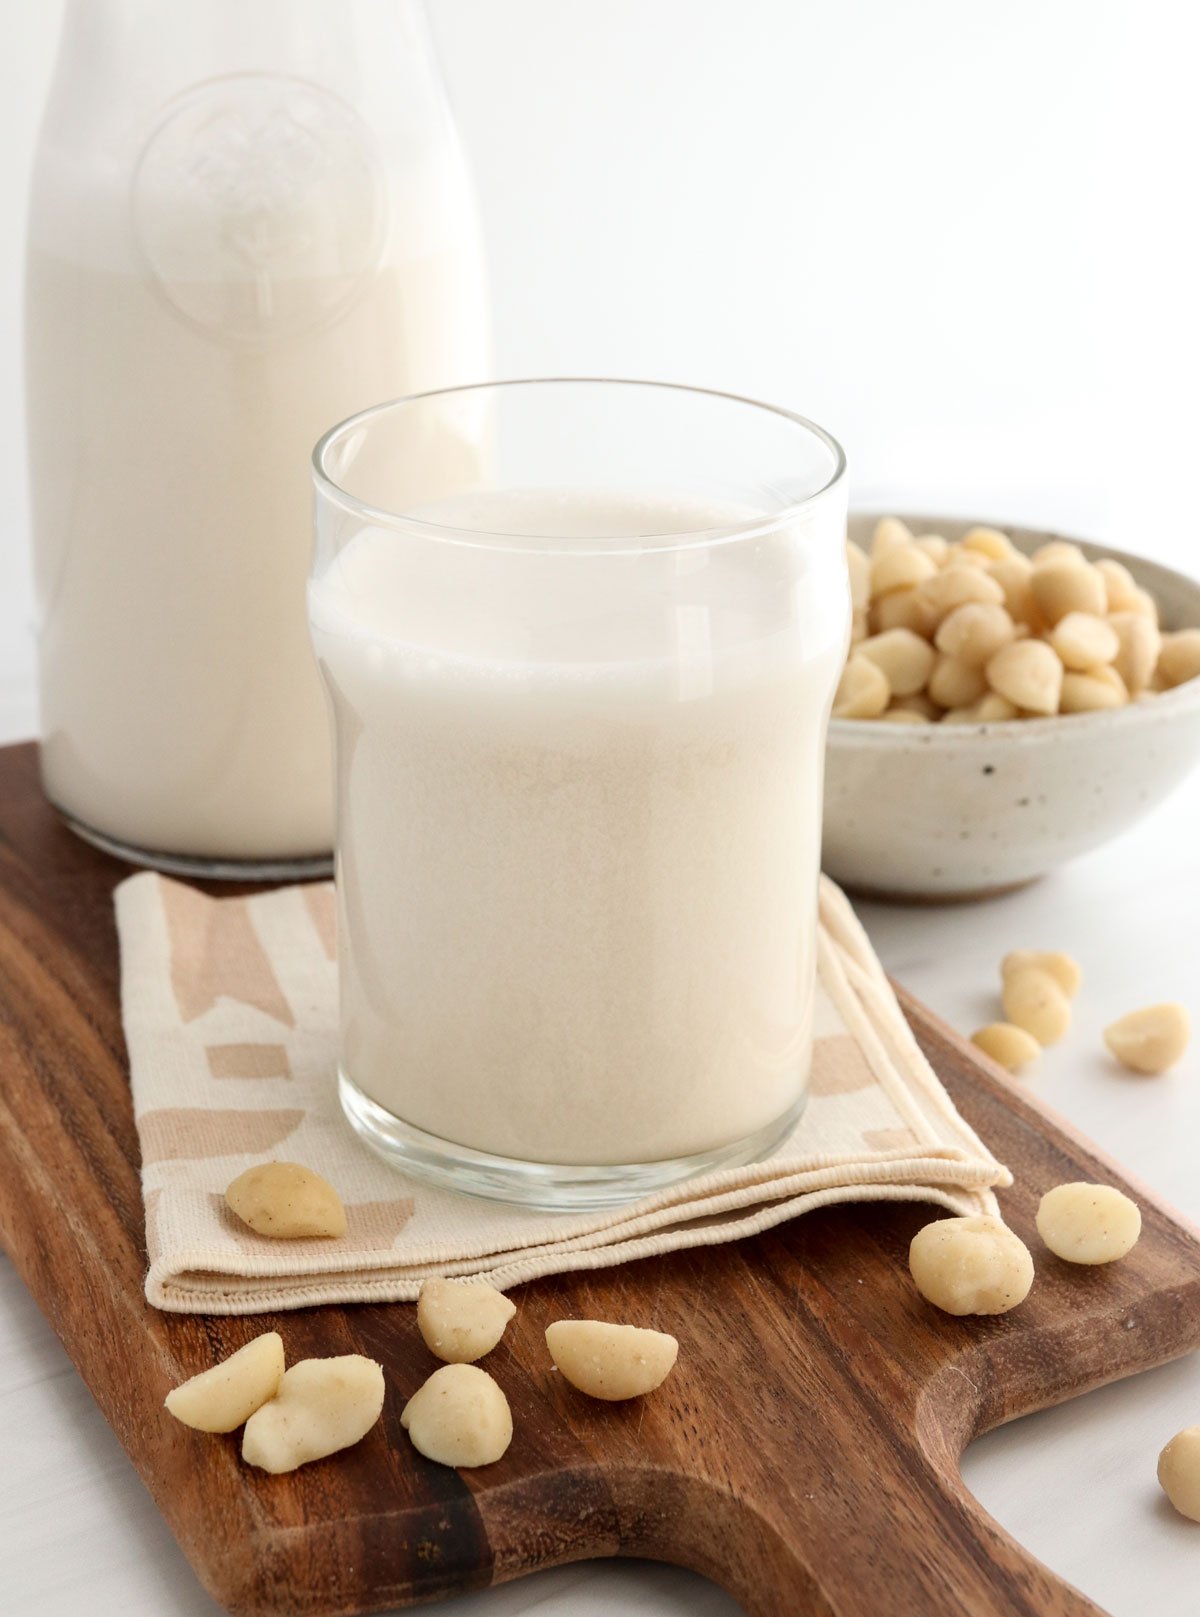 macadamia nut milk in glass and storage container